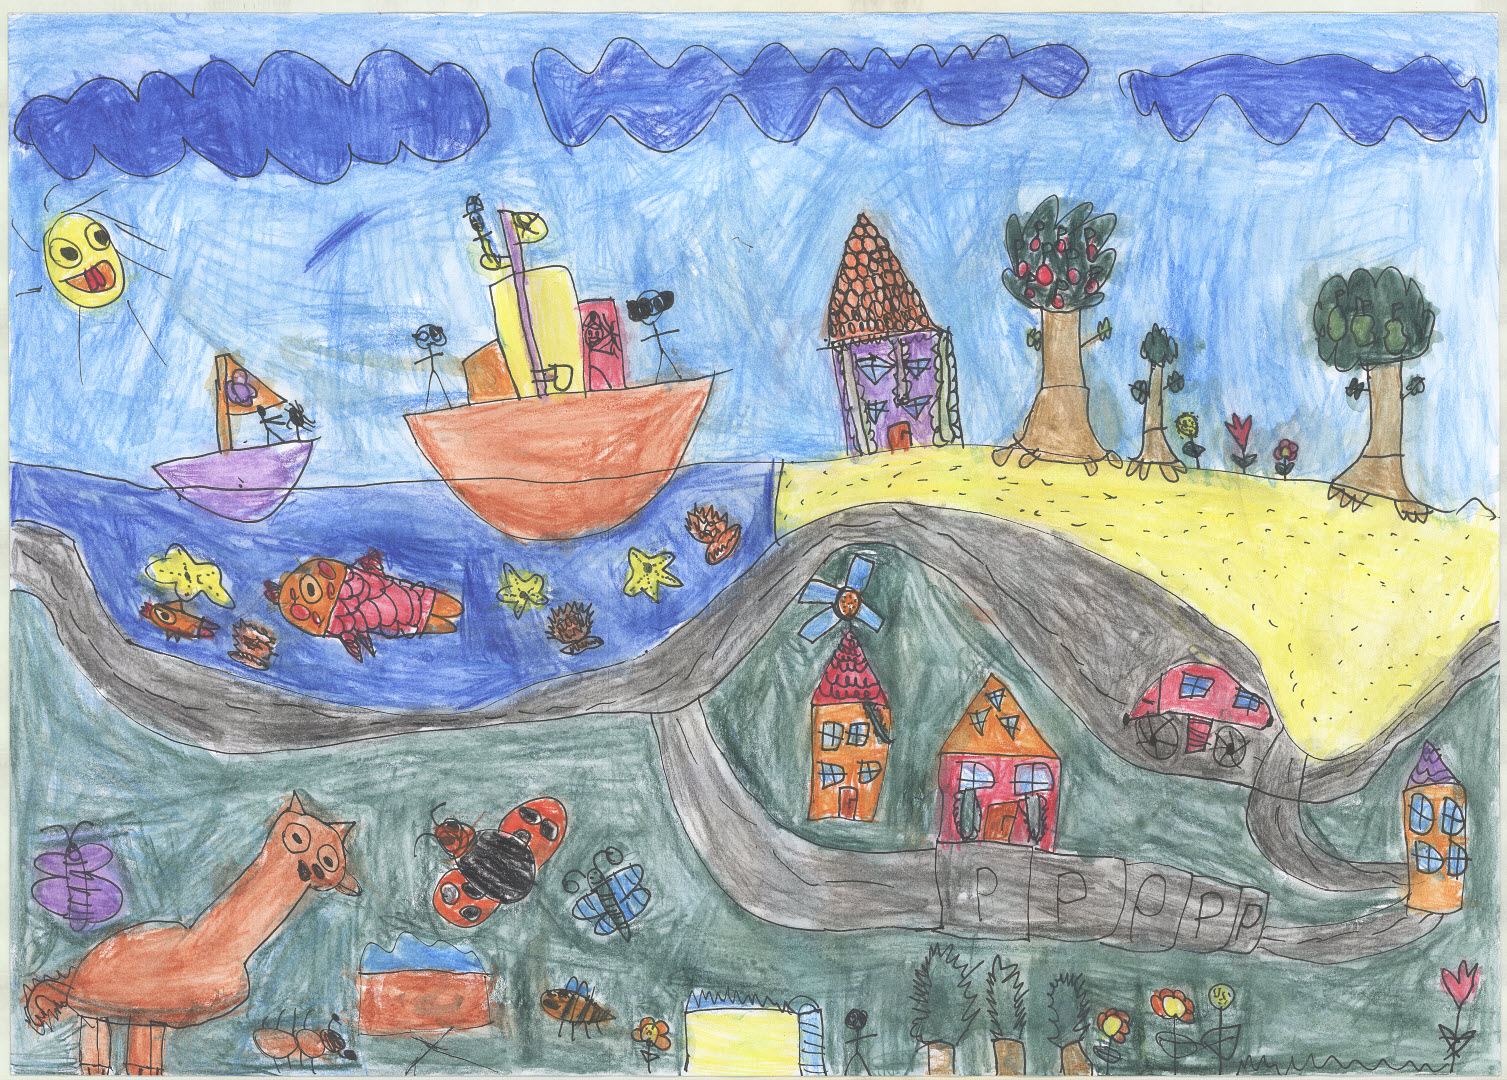 Shows the child's environment houses, trees, ocean, animals, flowers